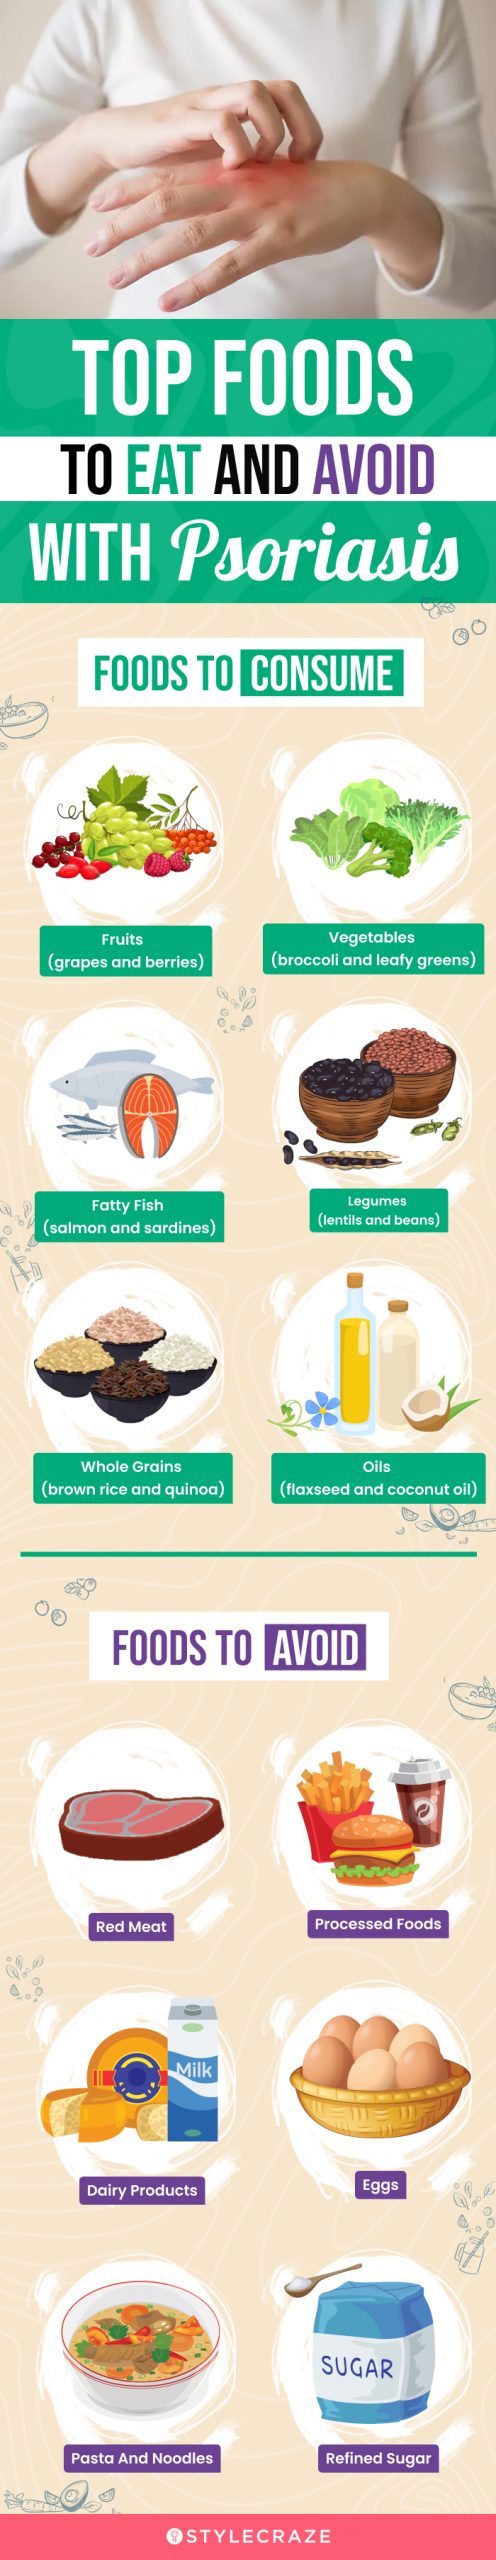 top foods to eat and avoid with psoriasis (infographic)